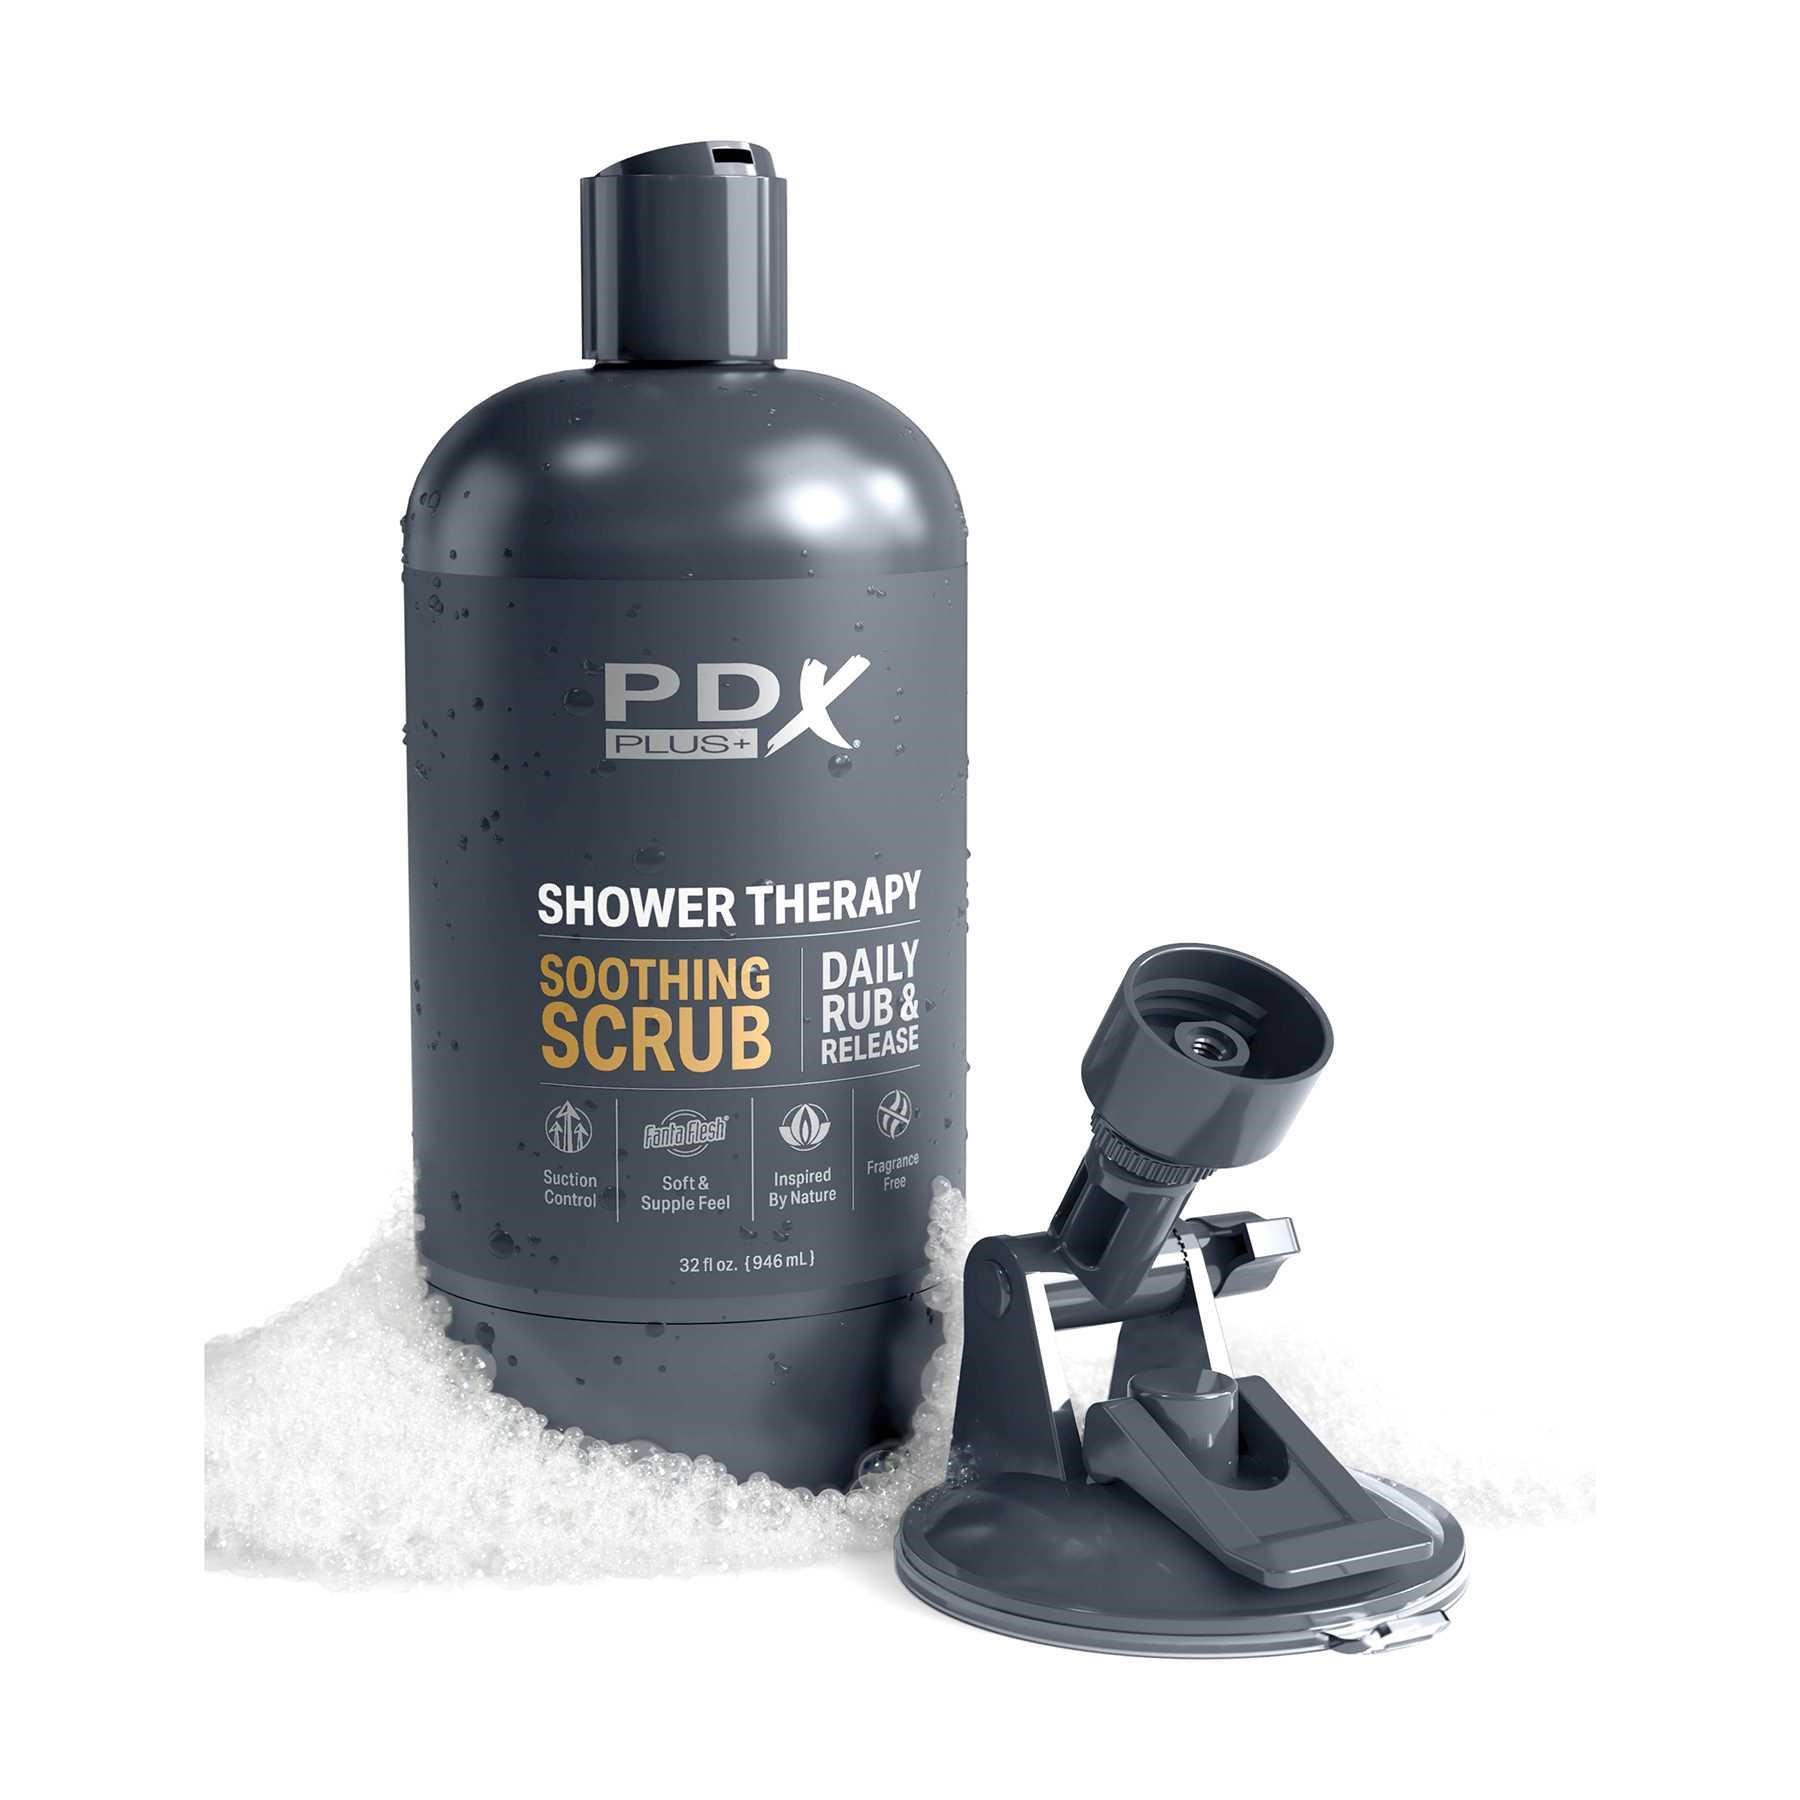 PDX Plus Shower Therapy Soothing Scrub Discreet Stroker brown next to mount